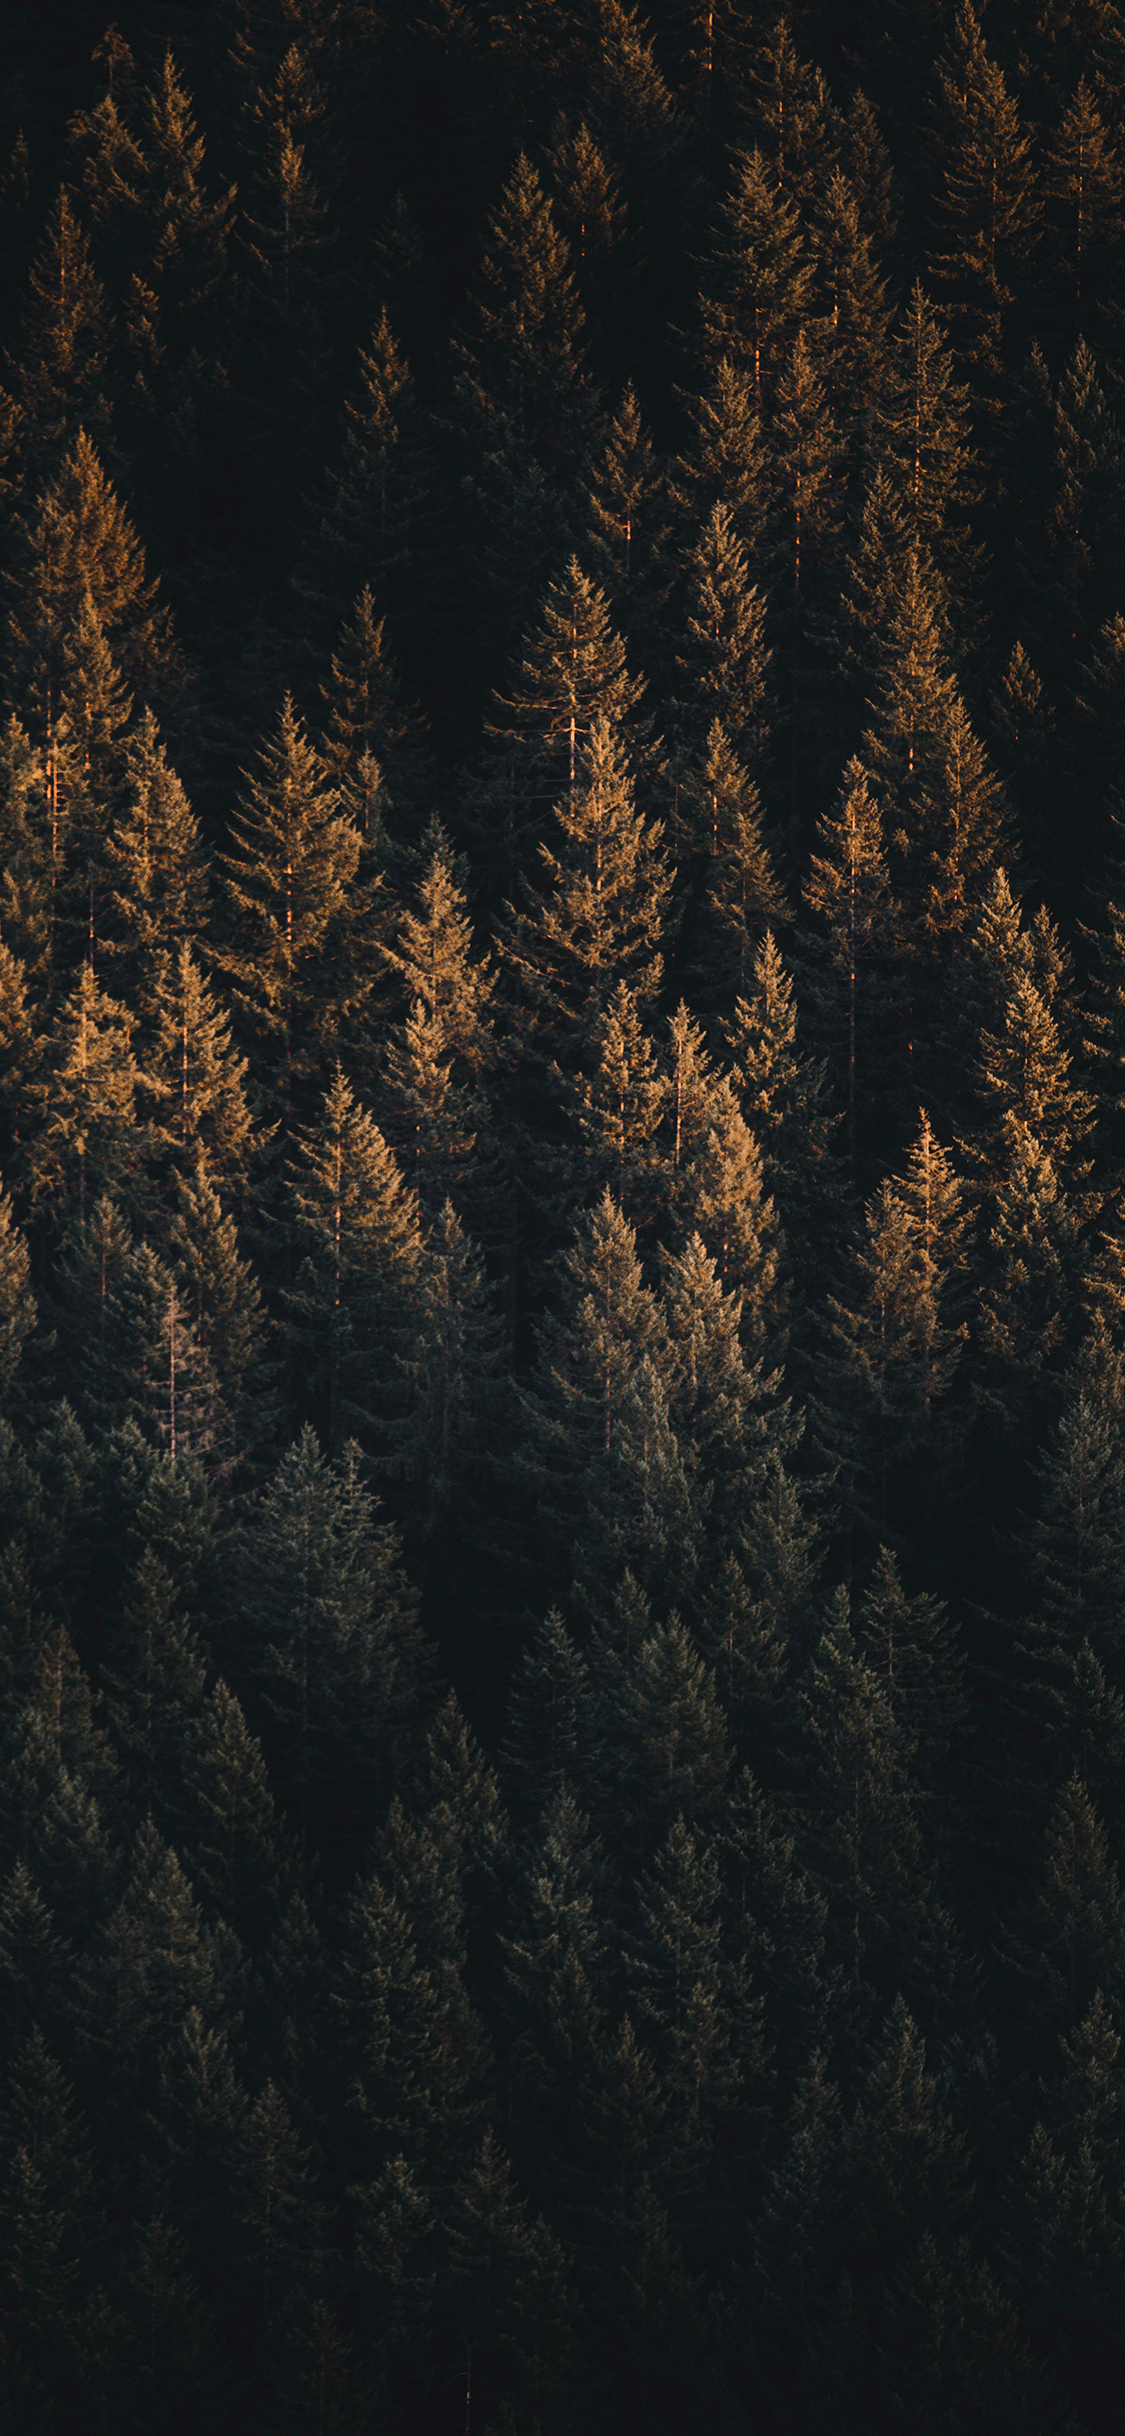 Night Forest Iphone Wallpapers Top Free Night Forest Iphone Backgrounds Wallpaperaccess